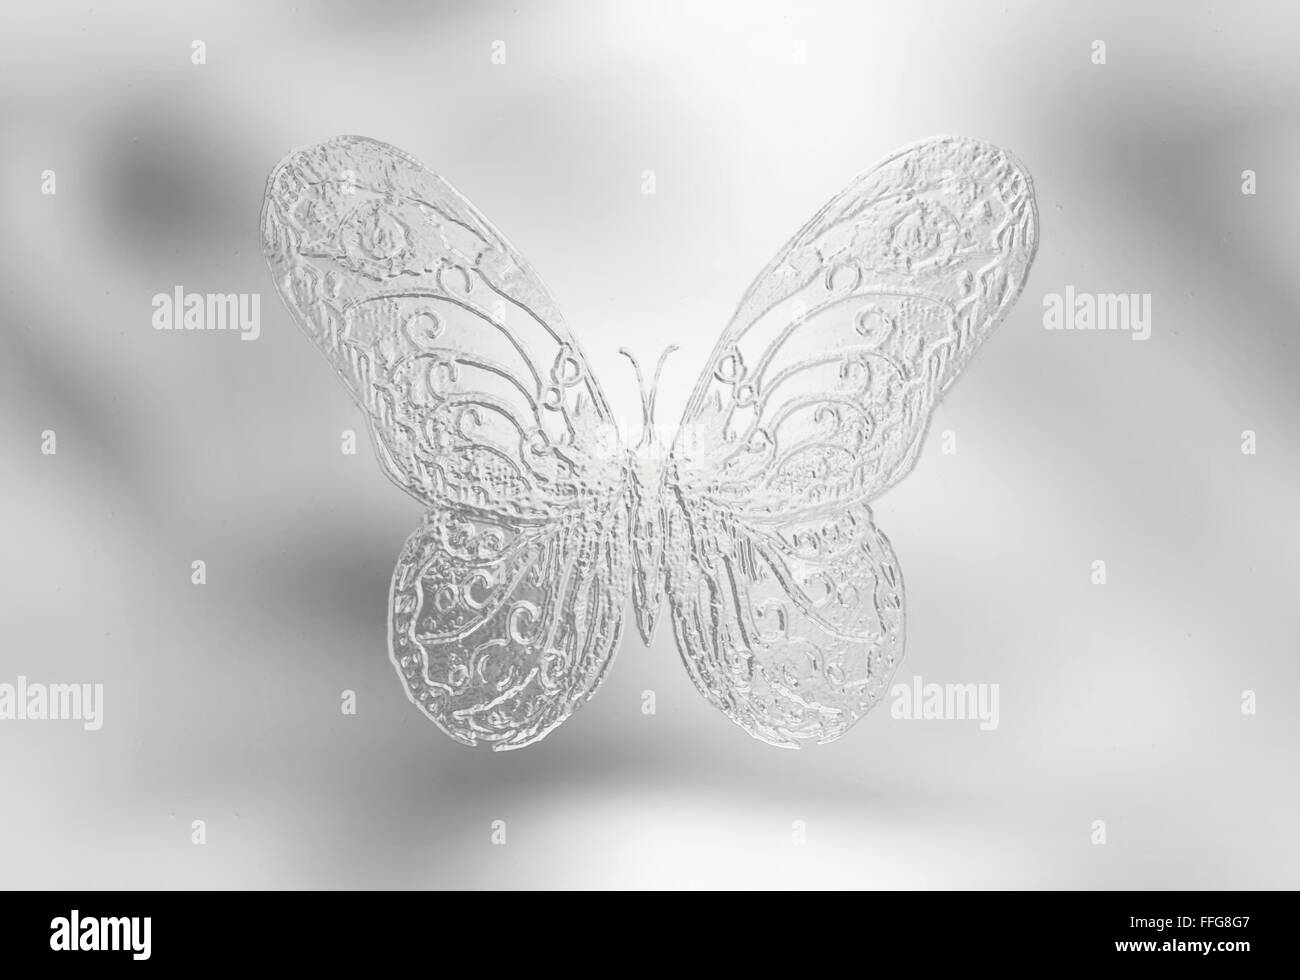 illustration of a butterfly, mixed medium, glass and silver effect Stock Photo